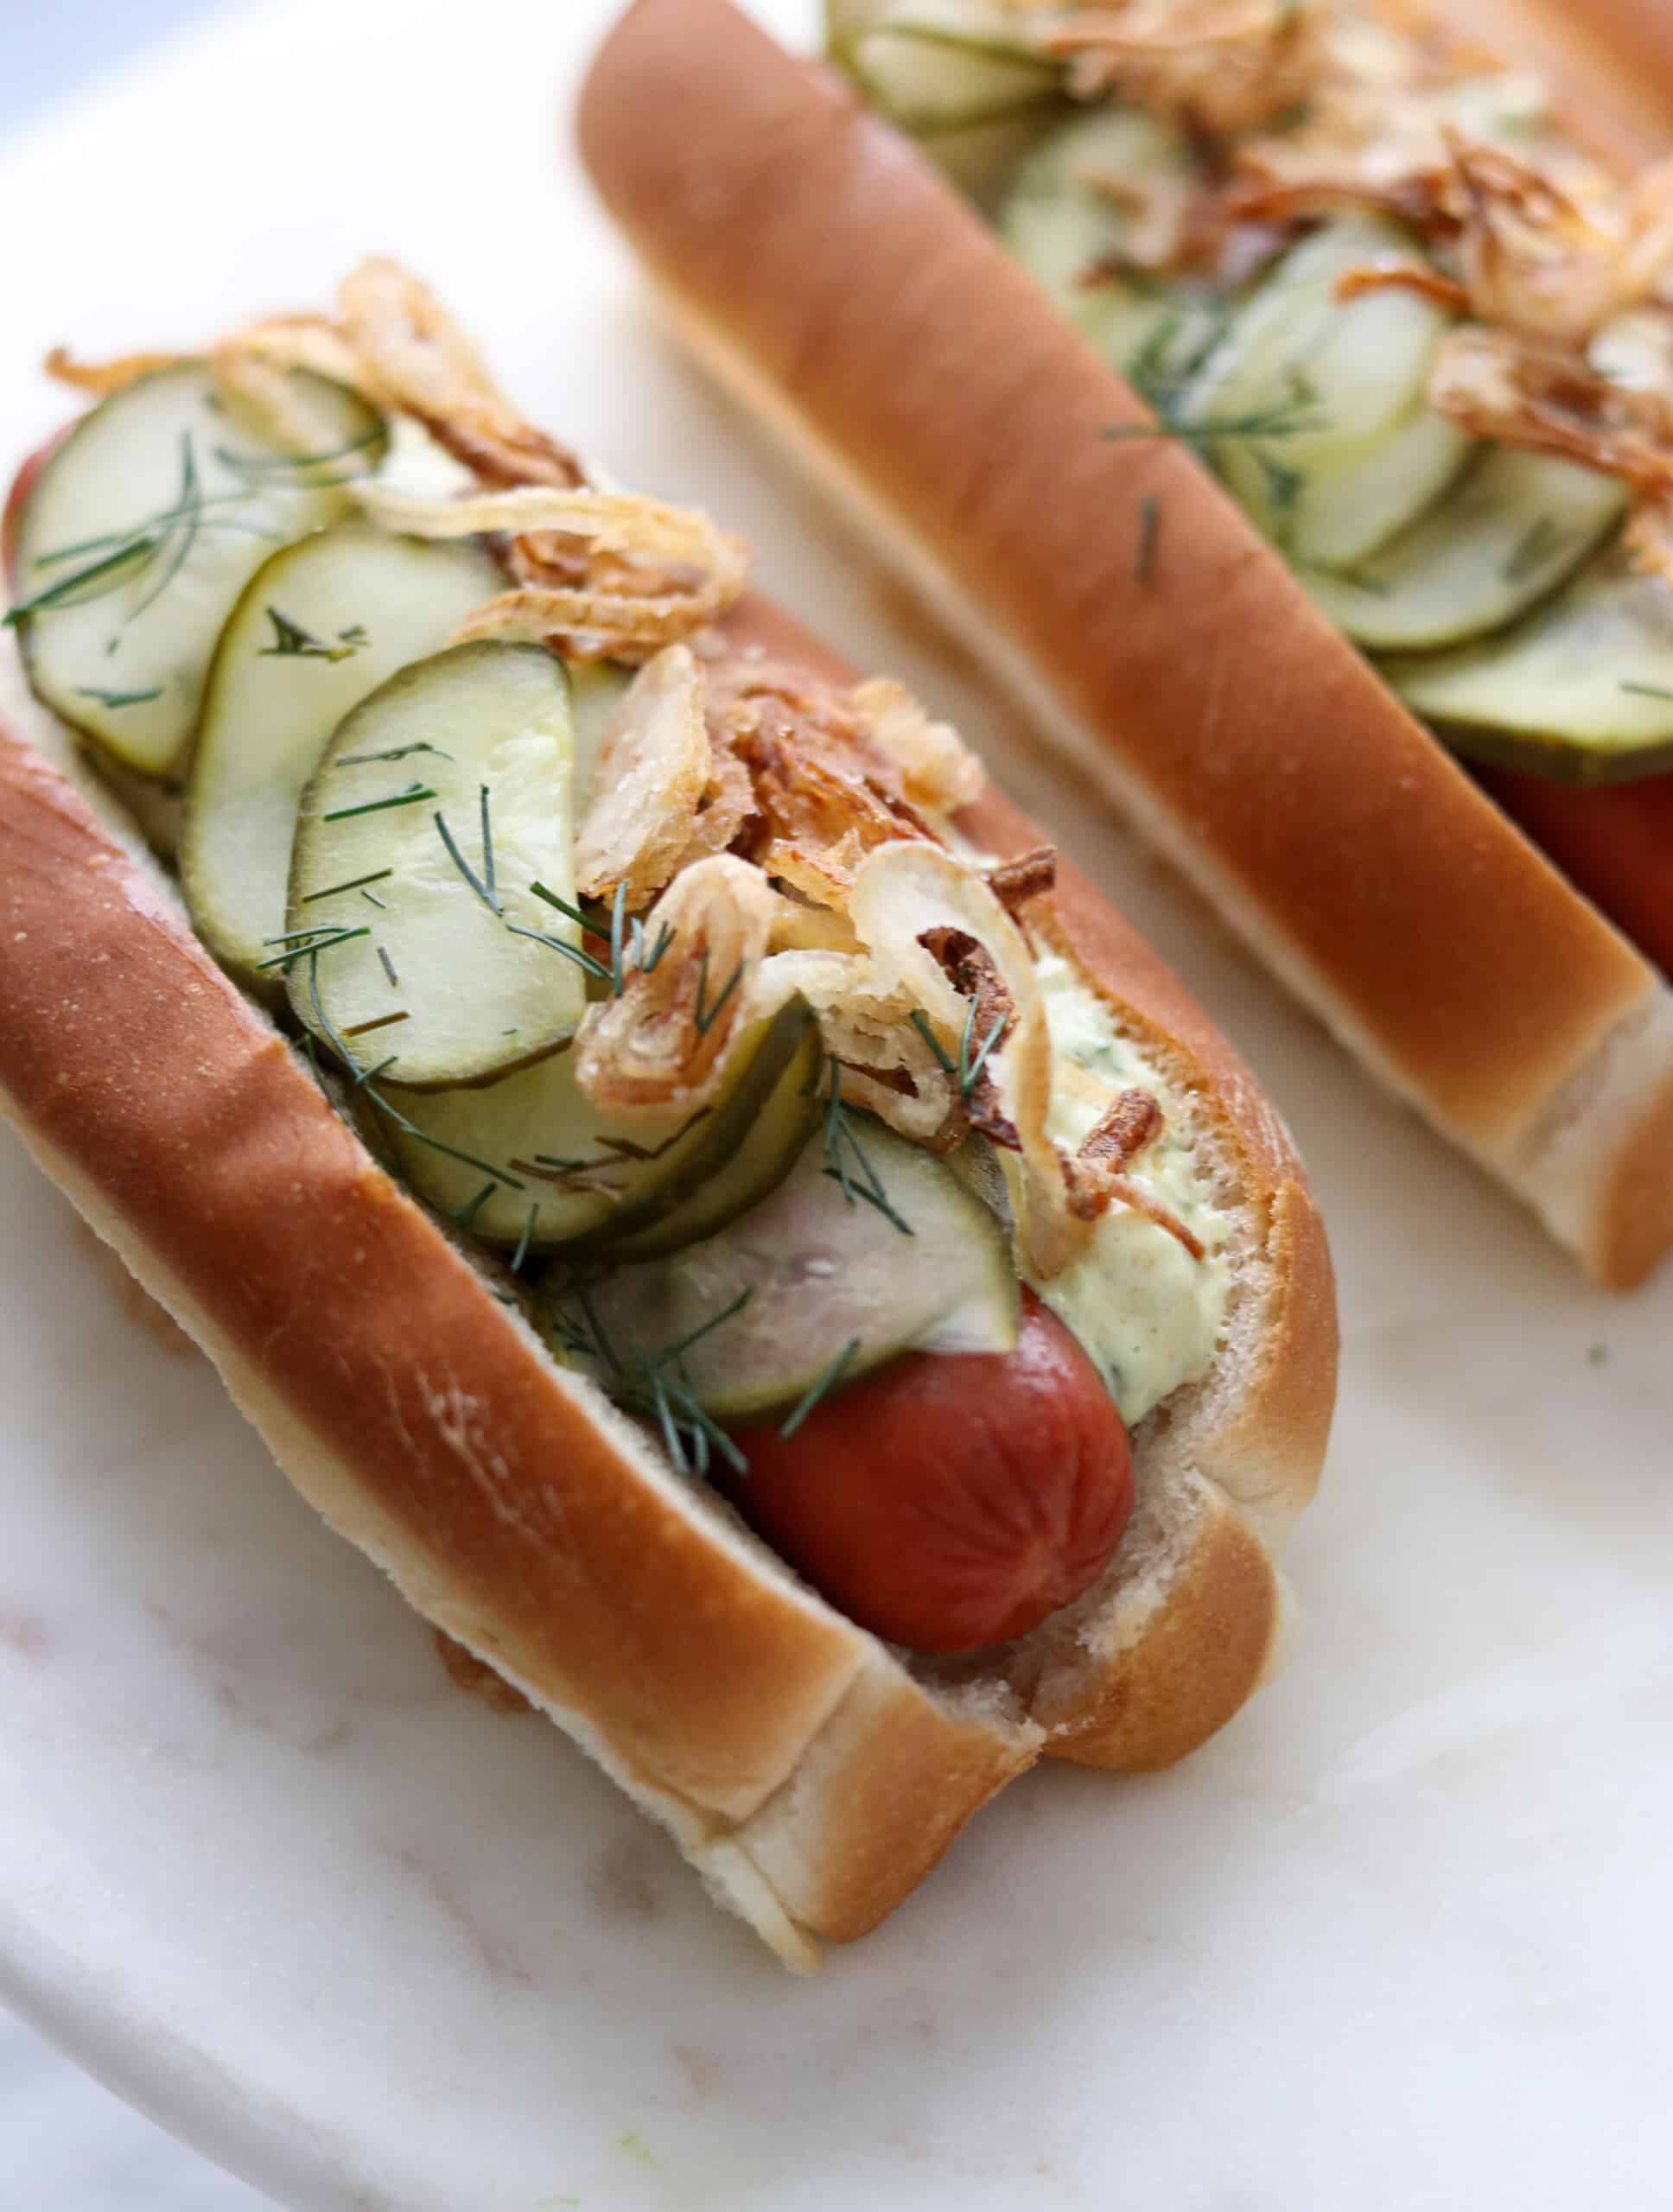 Danish Hot Dogs on a marble surface.